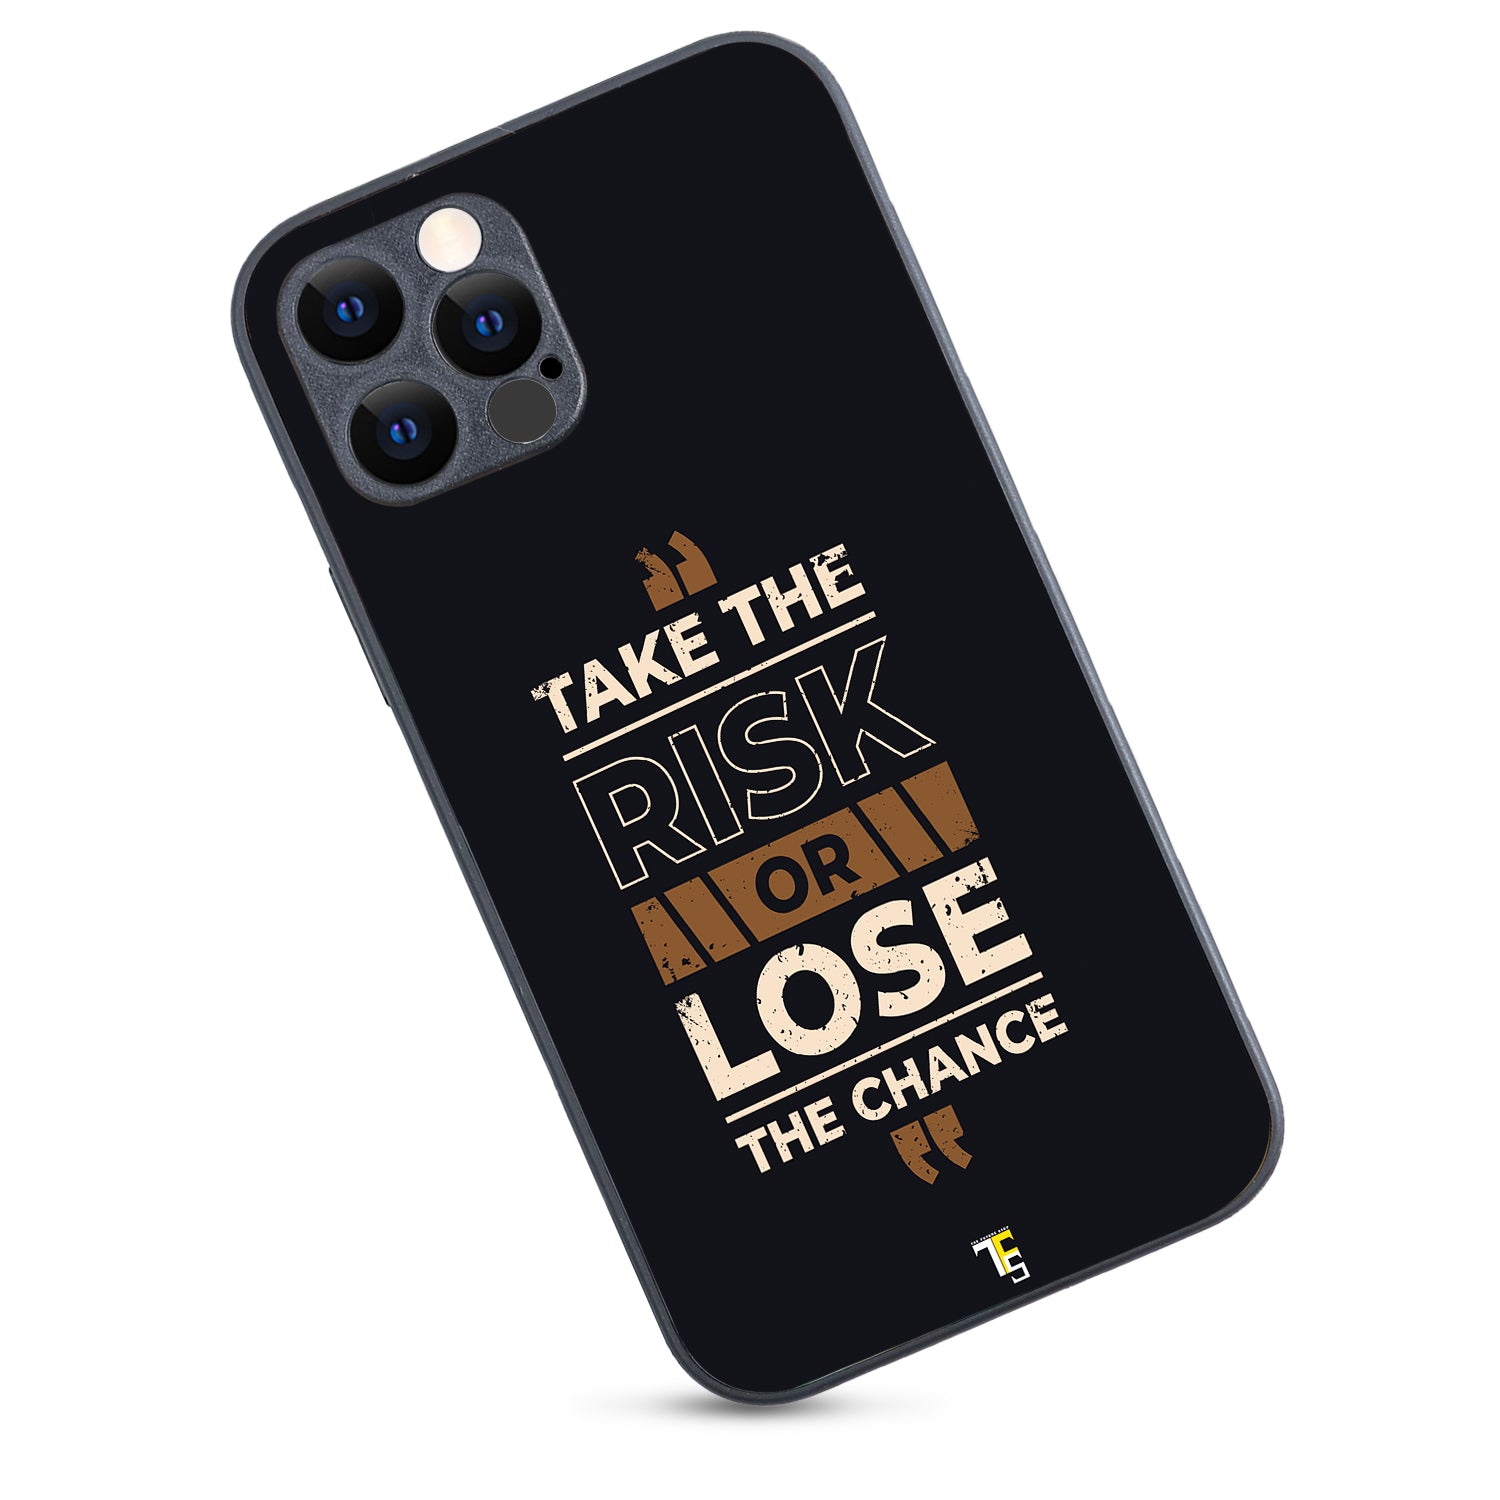 Take Risk Trading iPhone 12 Pro Case